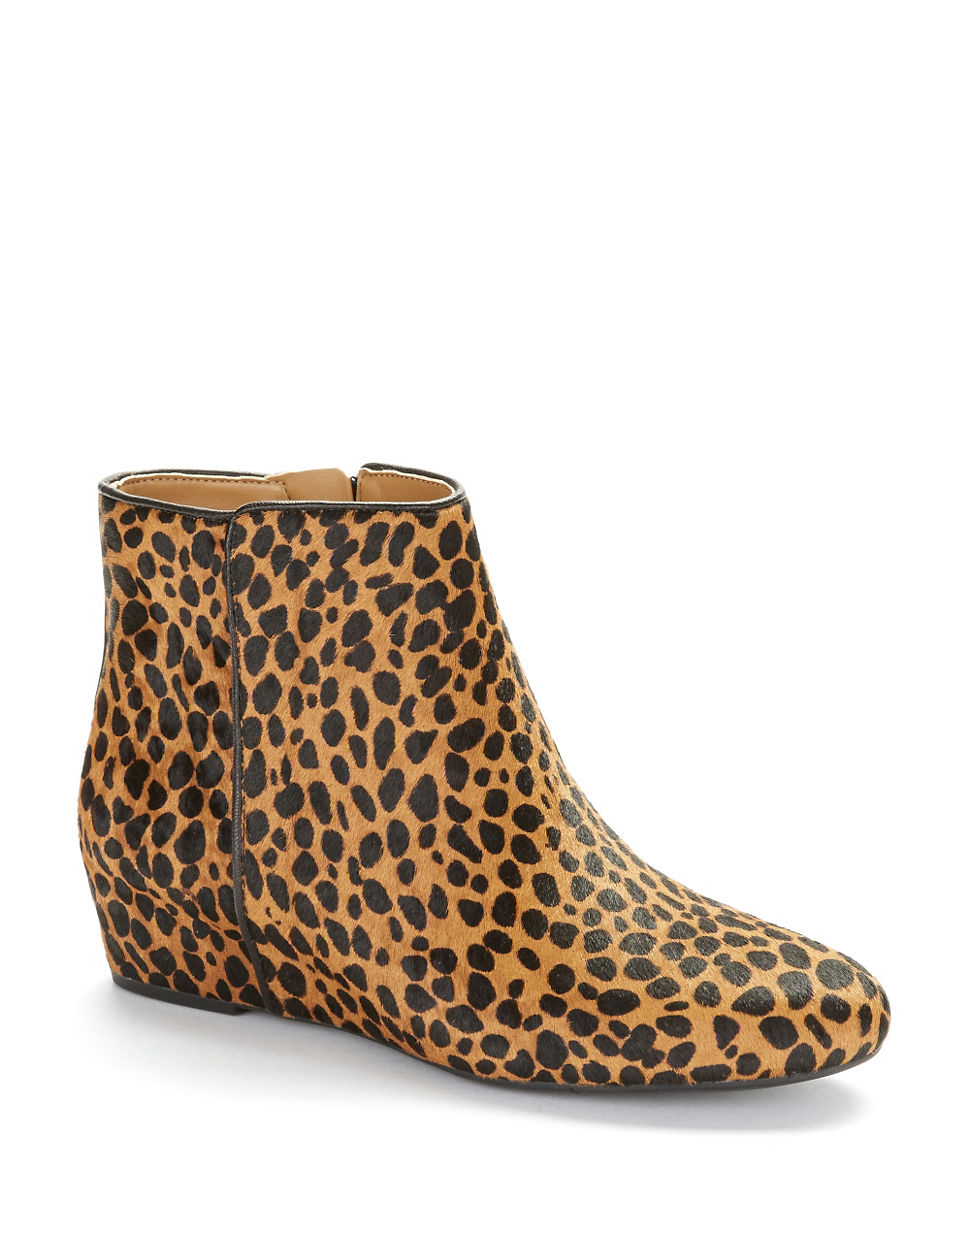 Nine west Metalina Animal Print Ankle Boots | Lyst